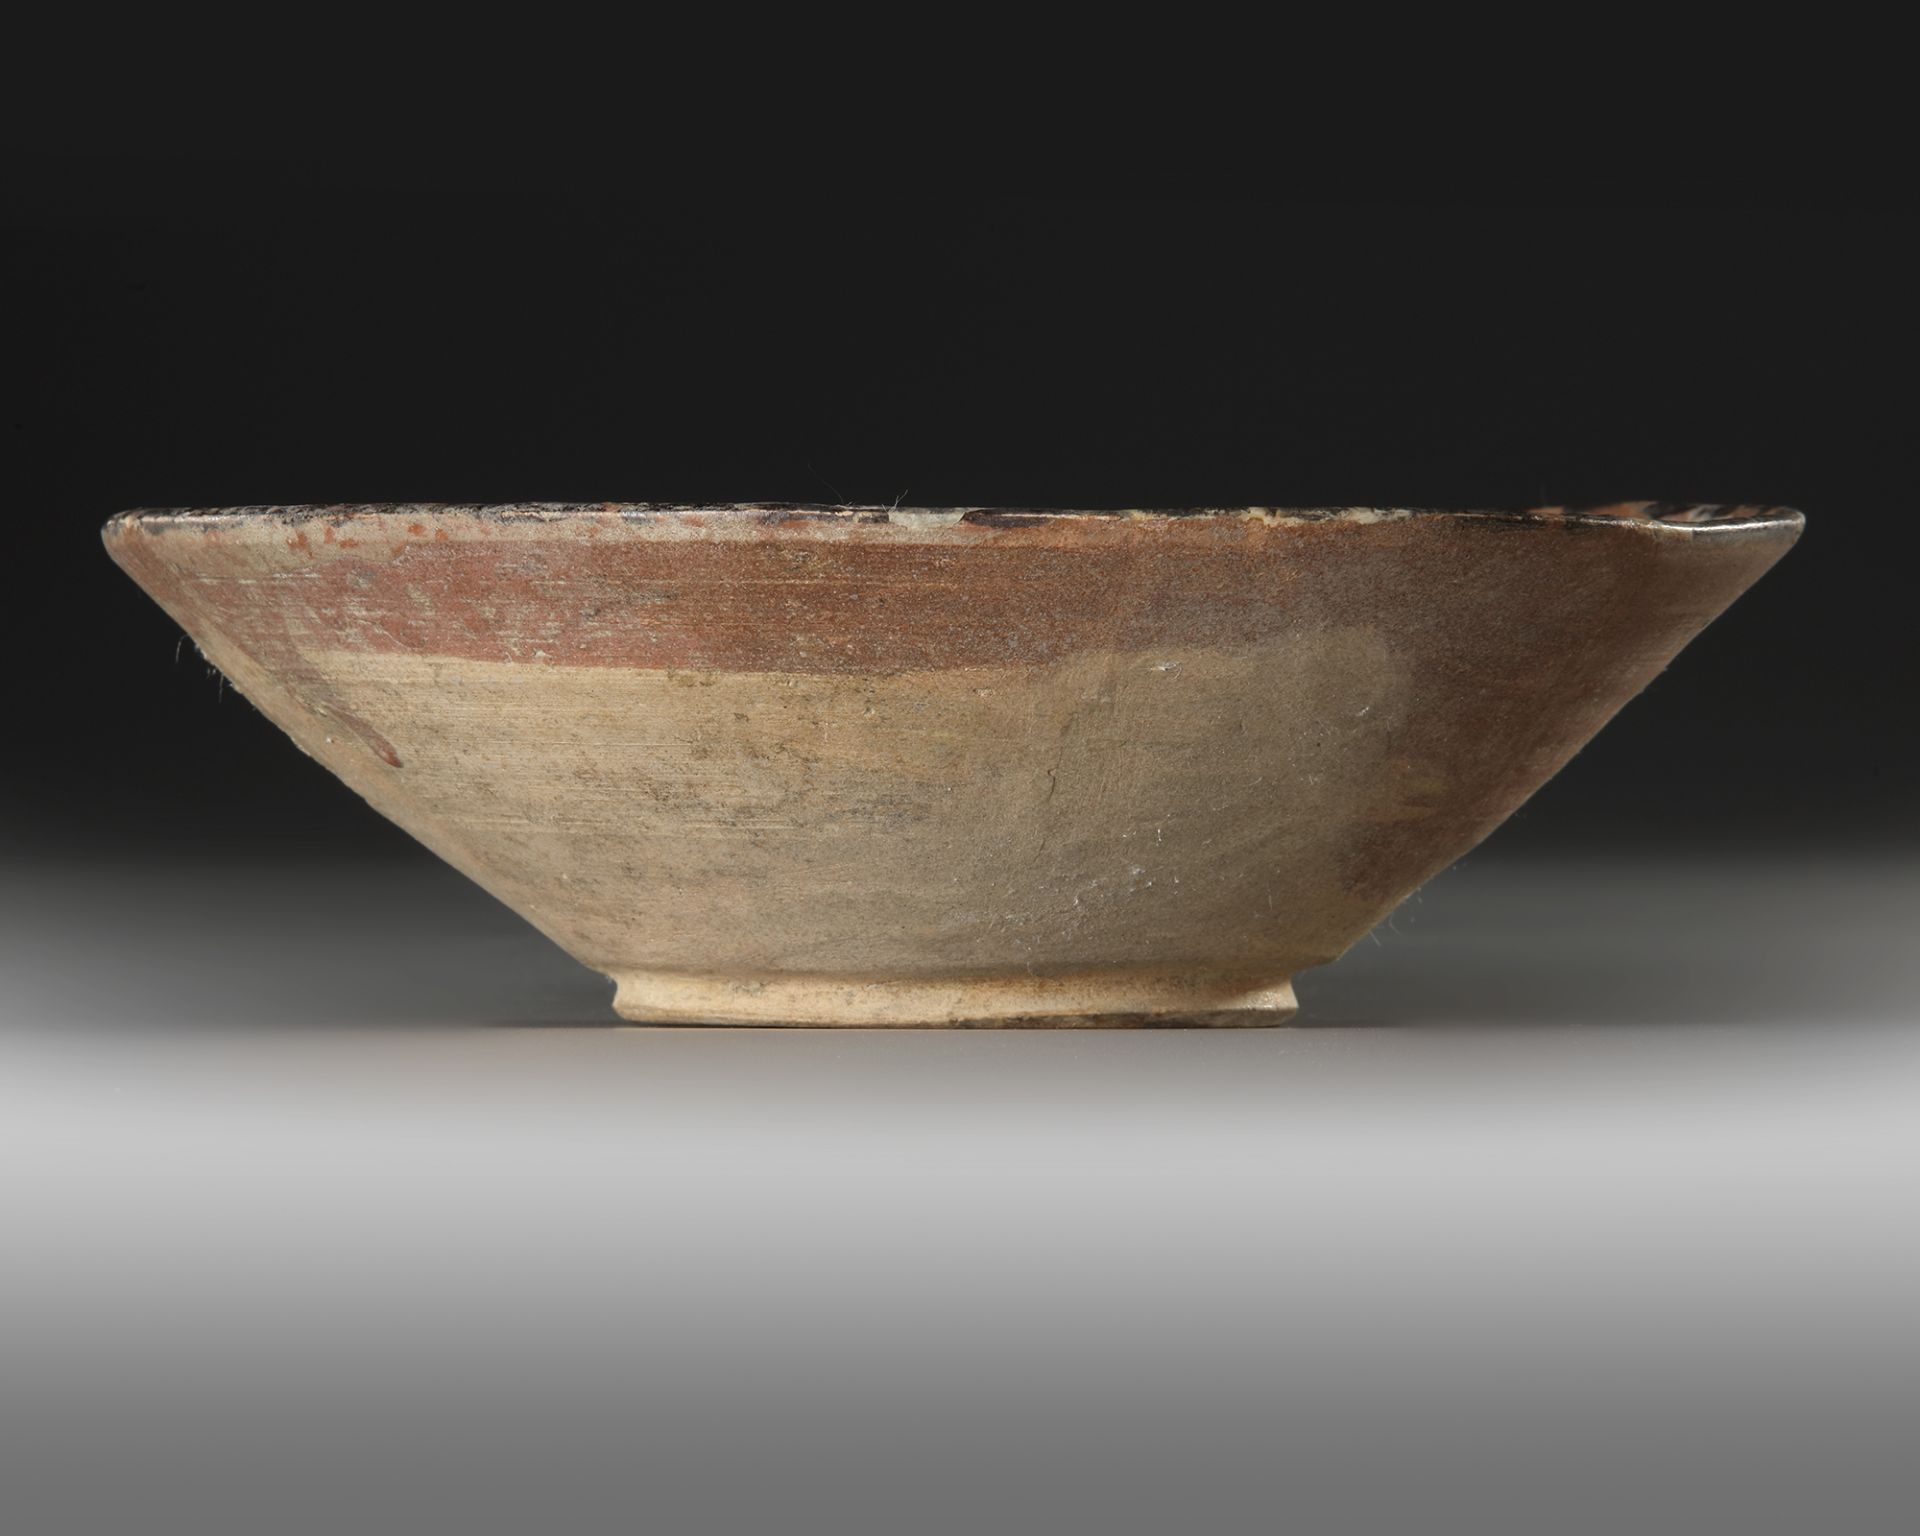 A NISHAPUR CONICAL POTTERY BOWL, PERSIA, 10TH CENTURY - Image 3 of 5